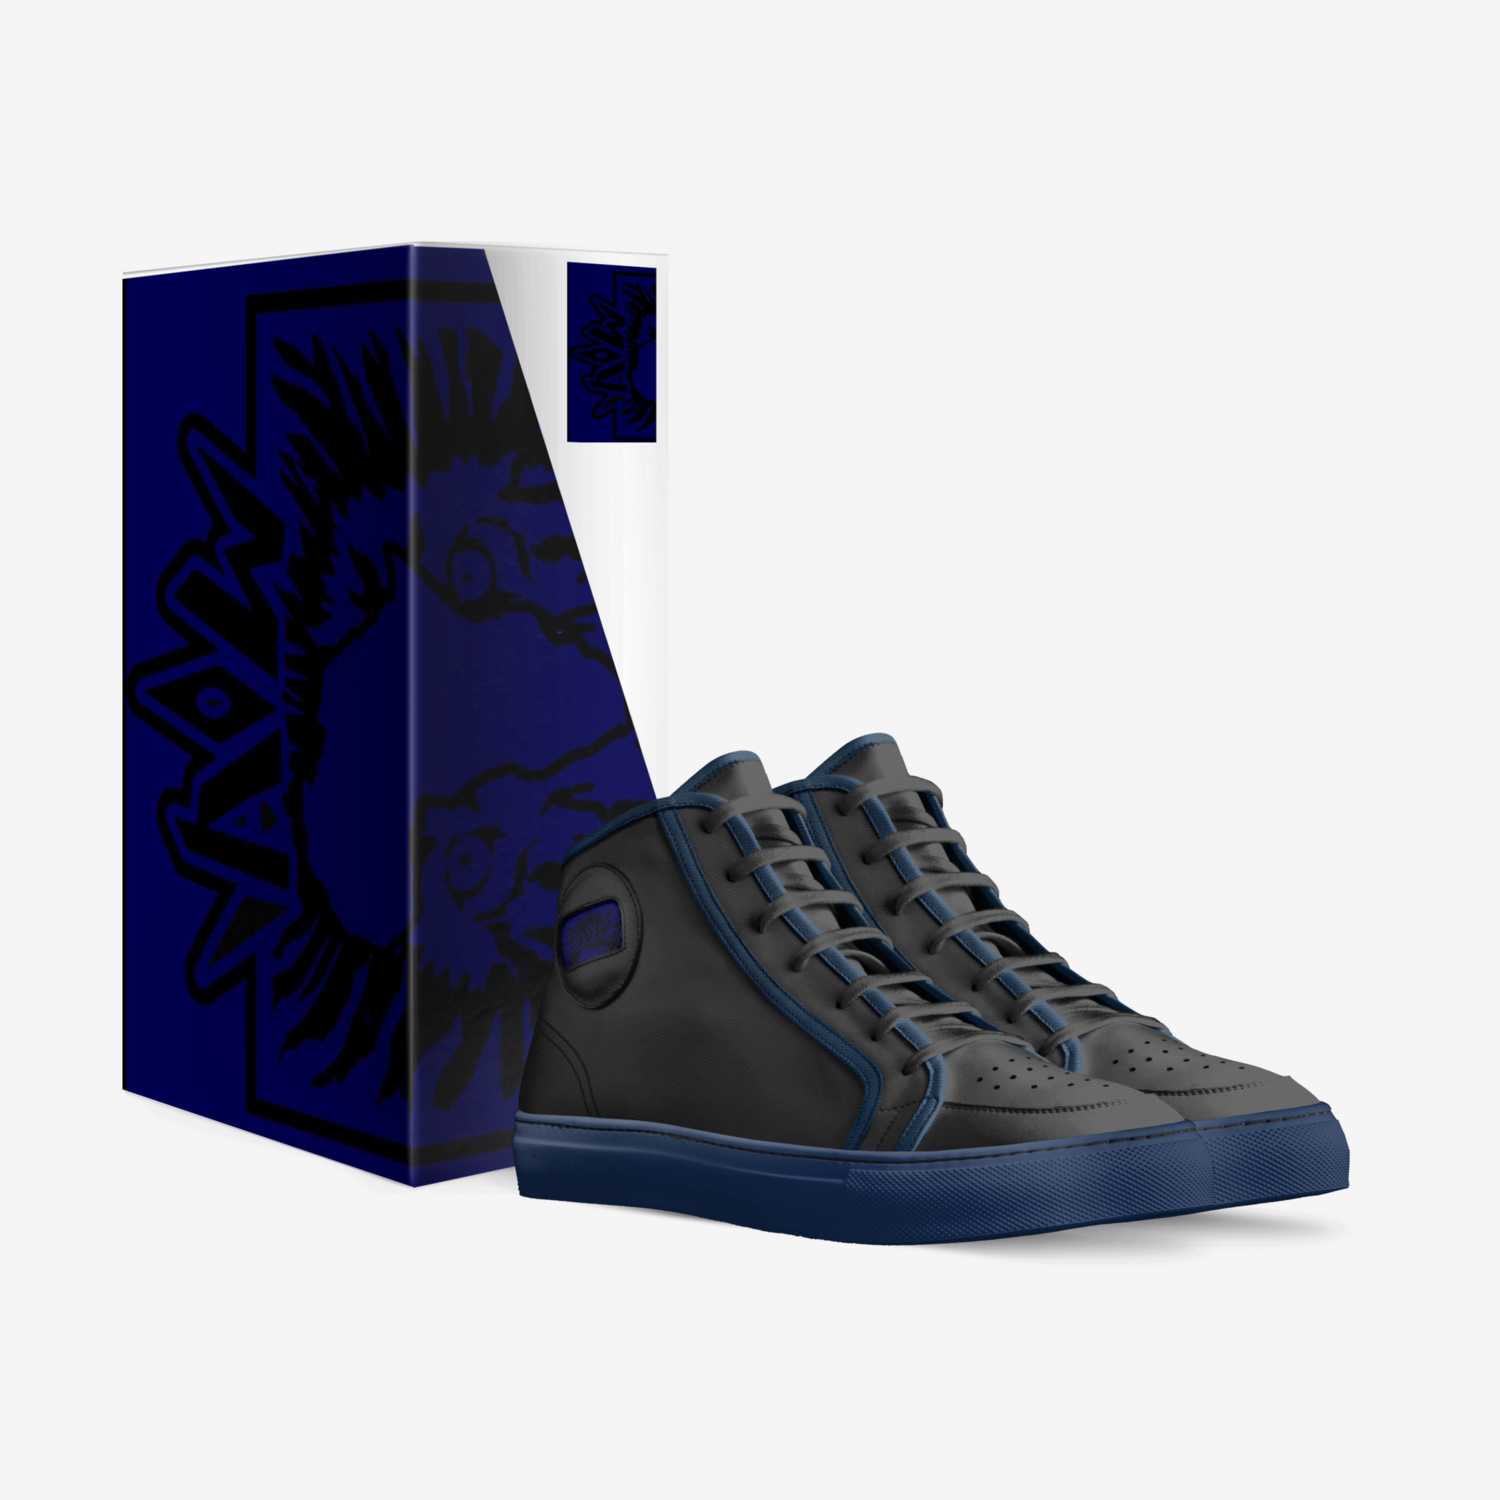 ADUBS BLK/BLU custom made in Italy shoes by Adrian Willis | Box view